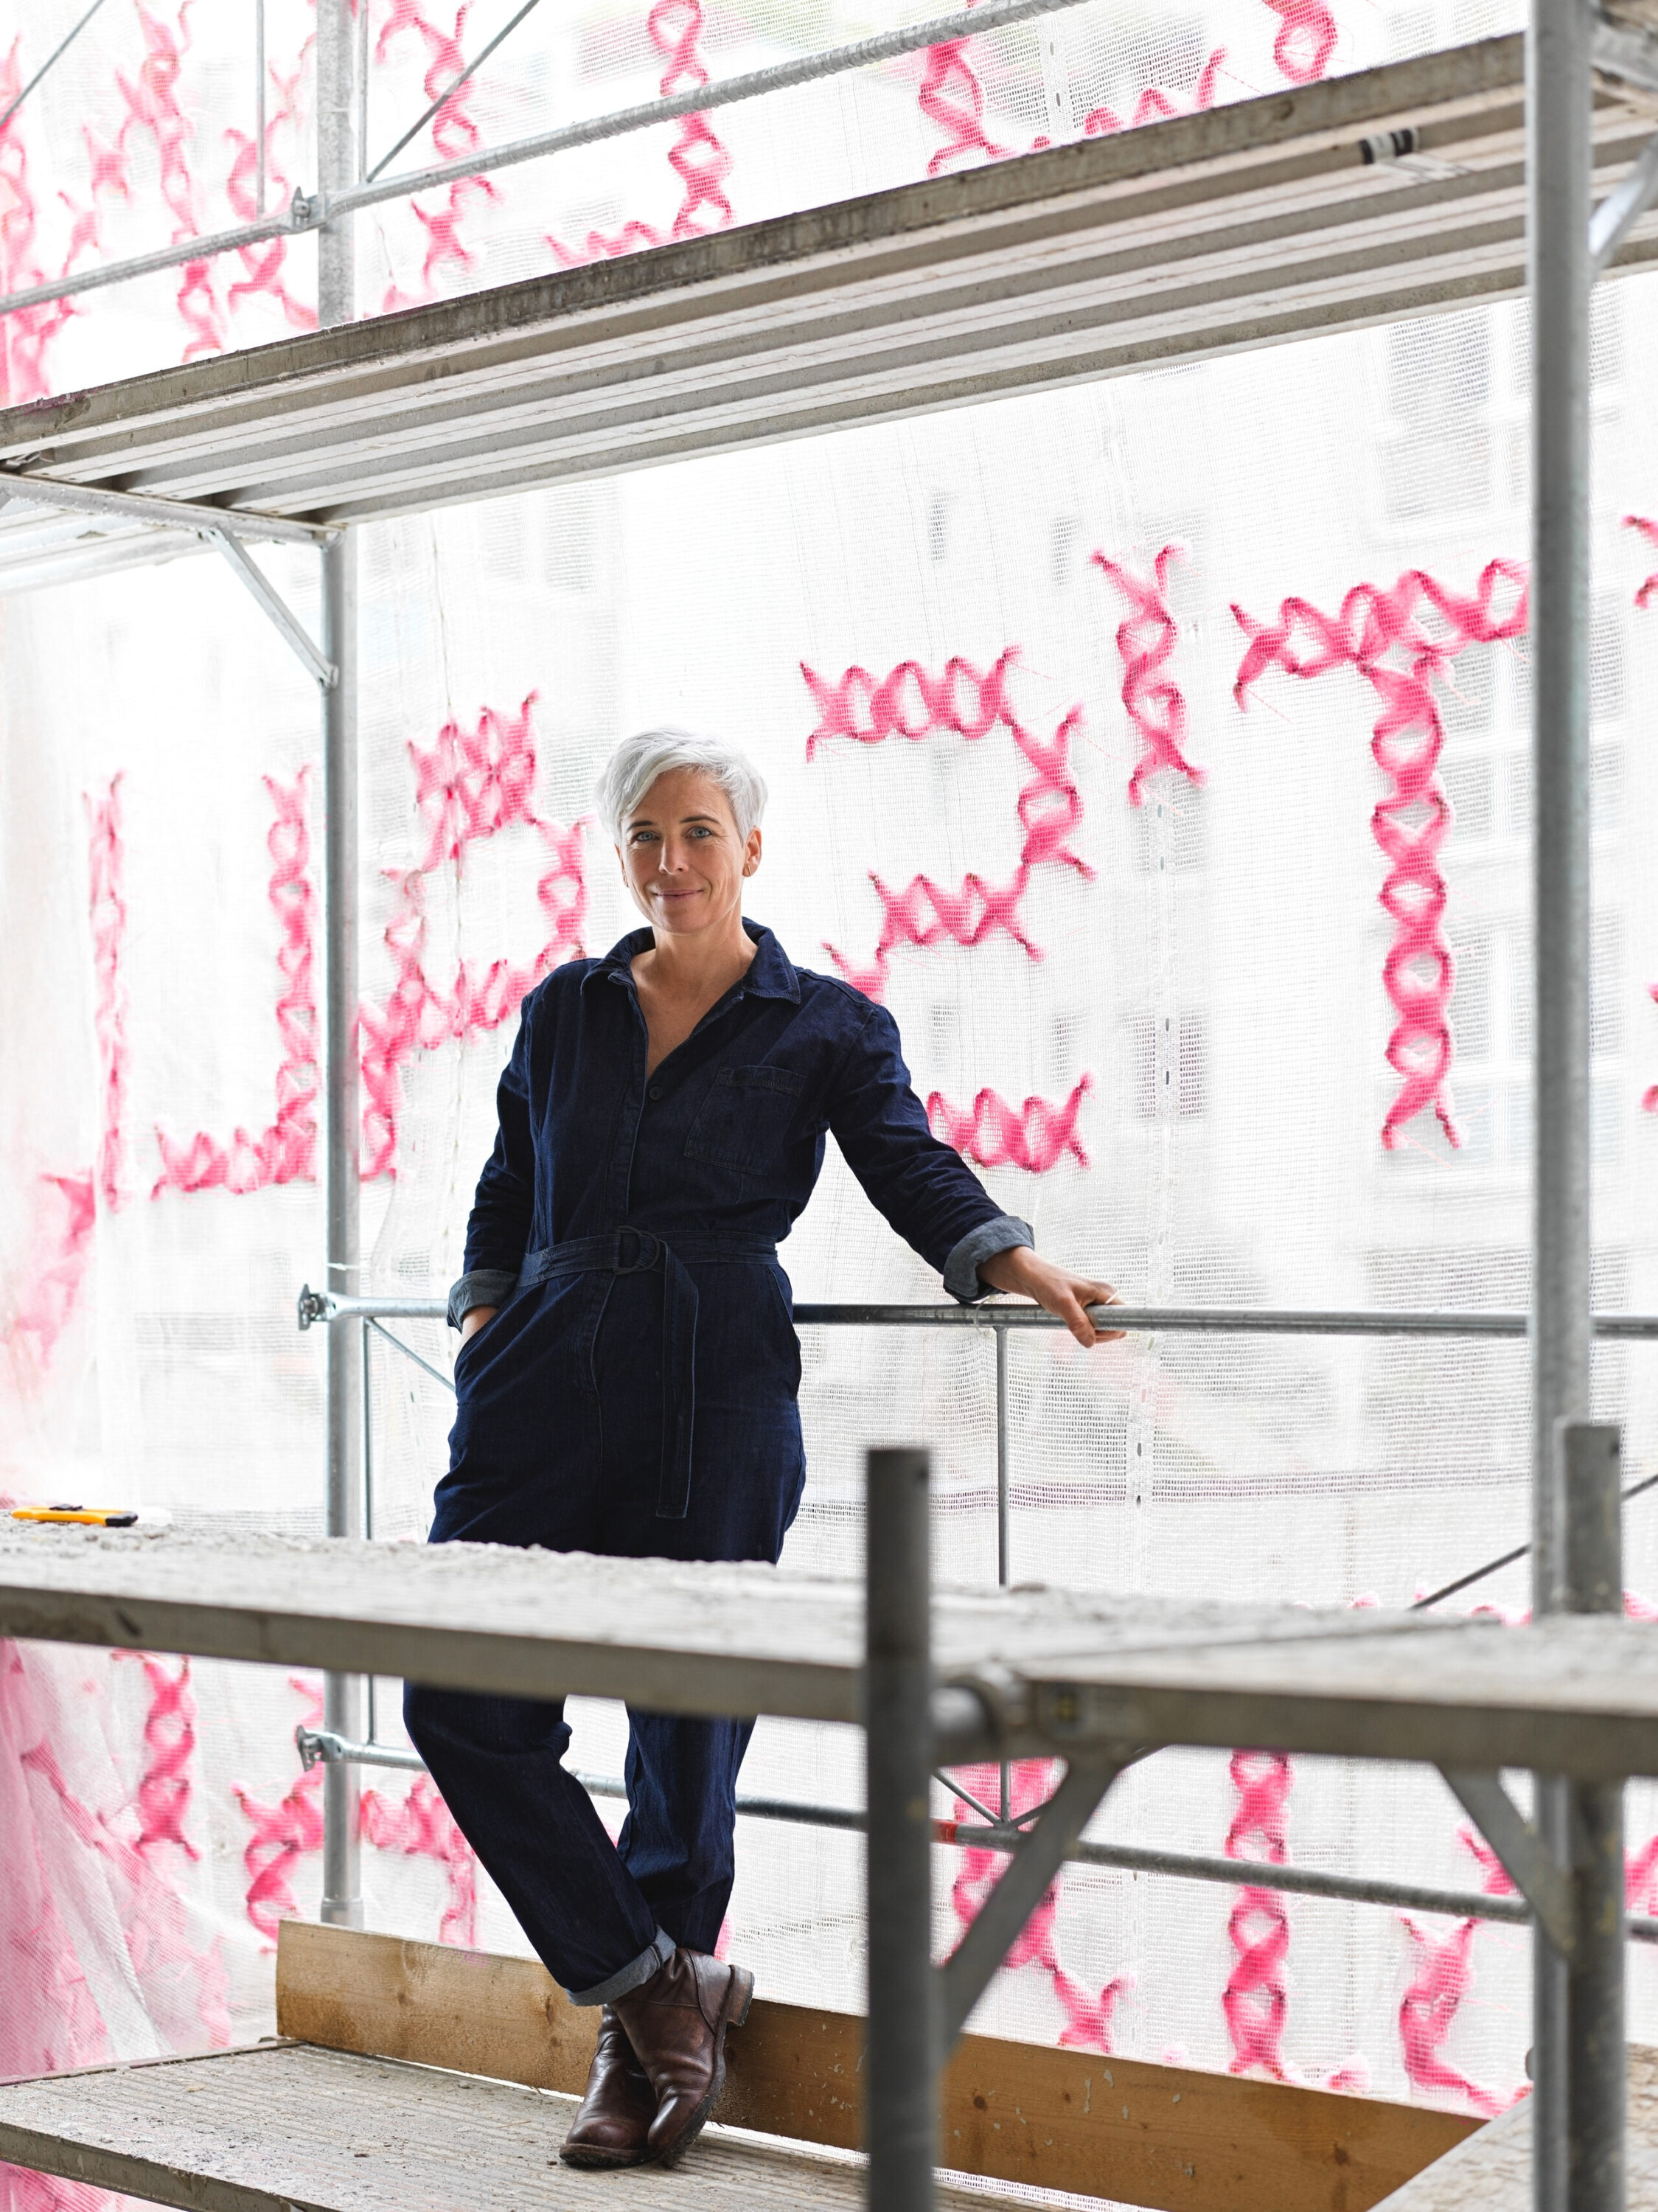 A light-skinned woman with short white hair stands on a scaffolding platform. Behind her, the scaffolding is covered in white mesh scrim stitched with bright pink letters.